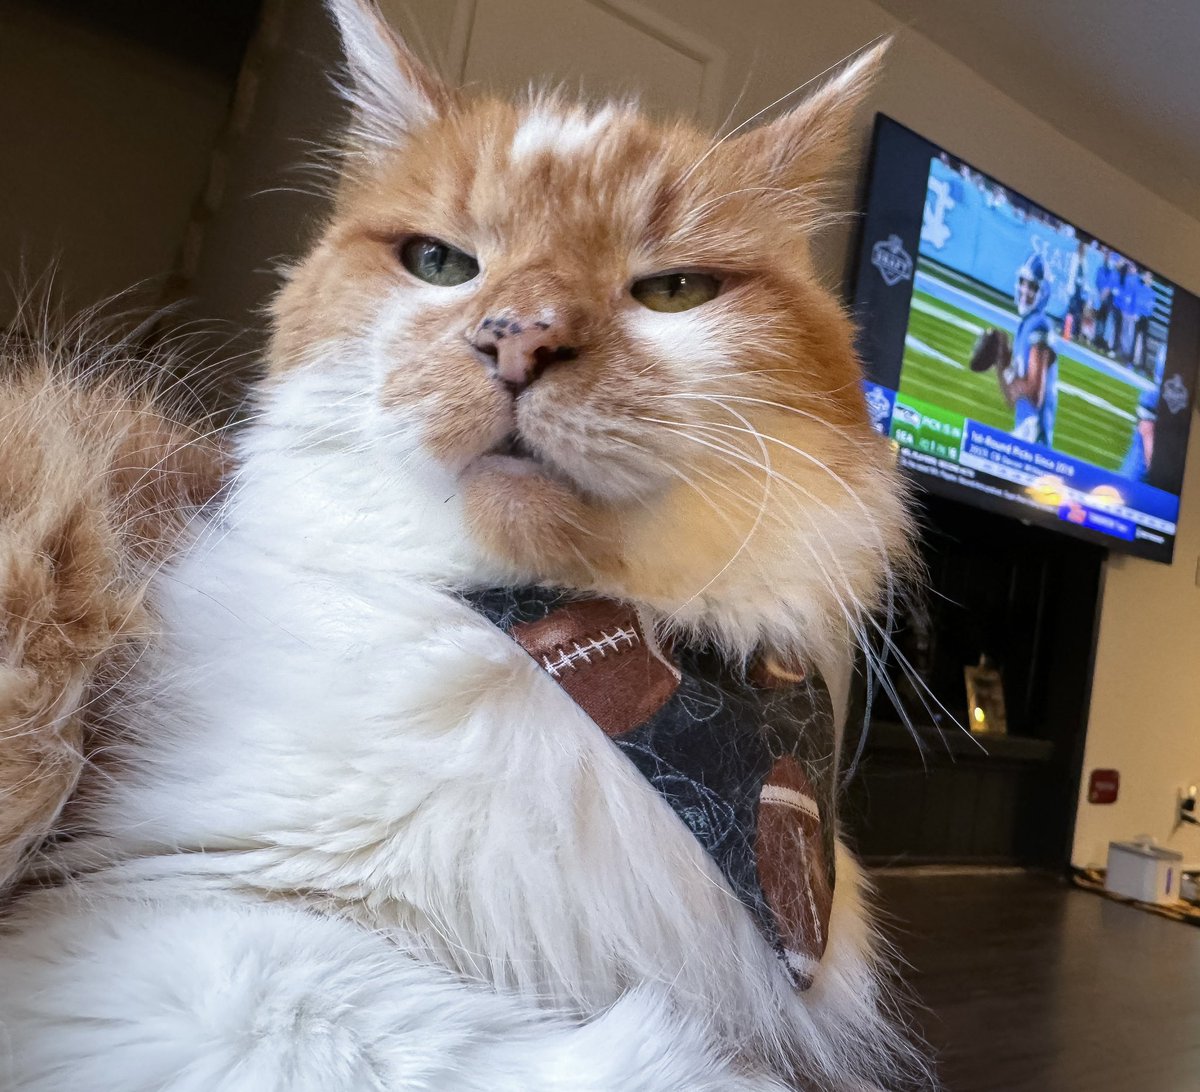 You mean we got 6 more rounds of this? 🏈🐾 #CatsOfTwitter #Raiders #NFLDraft #friyay